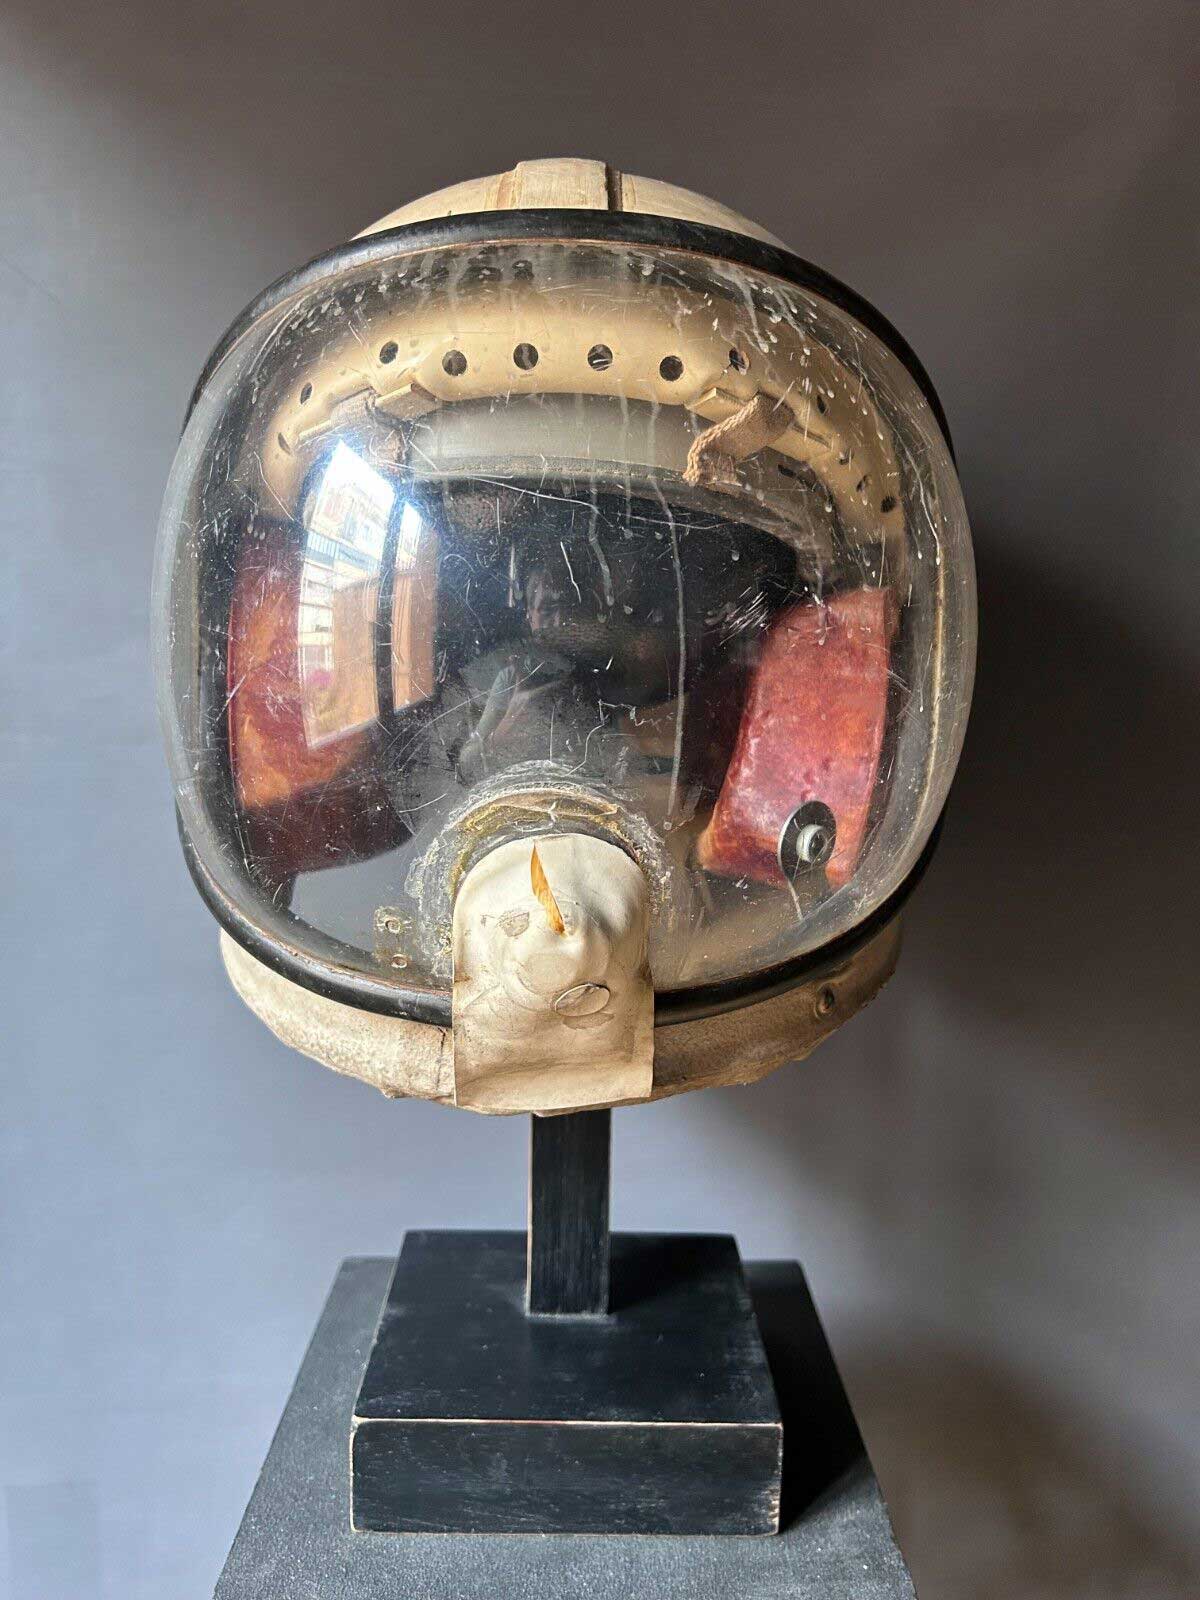 A helmet used to transport toxic fuel